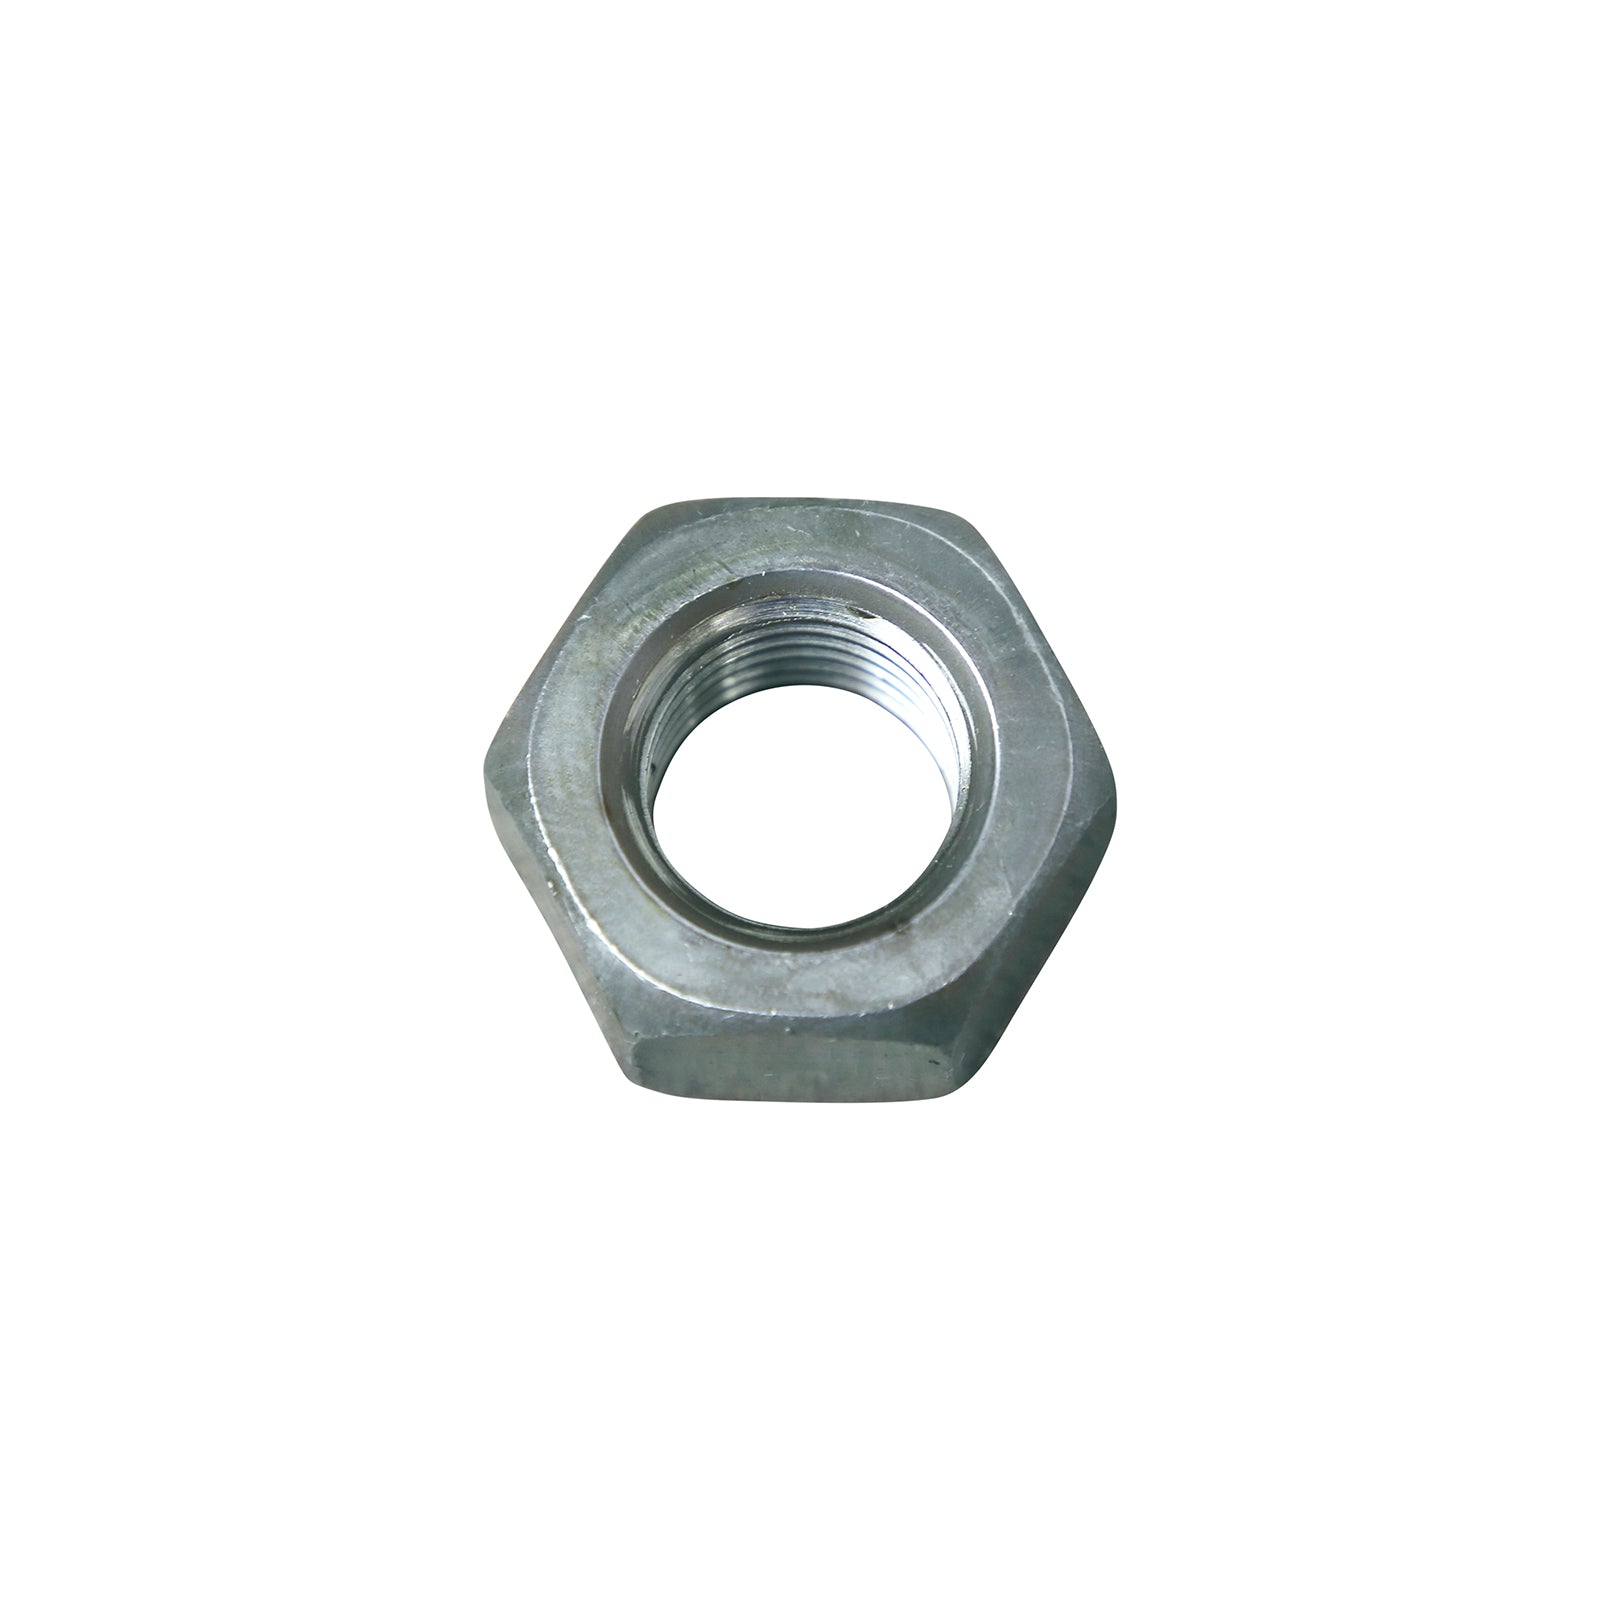 Hex Nuts - Heavy Hex Nuts - Finishing Hex Nuts